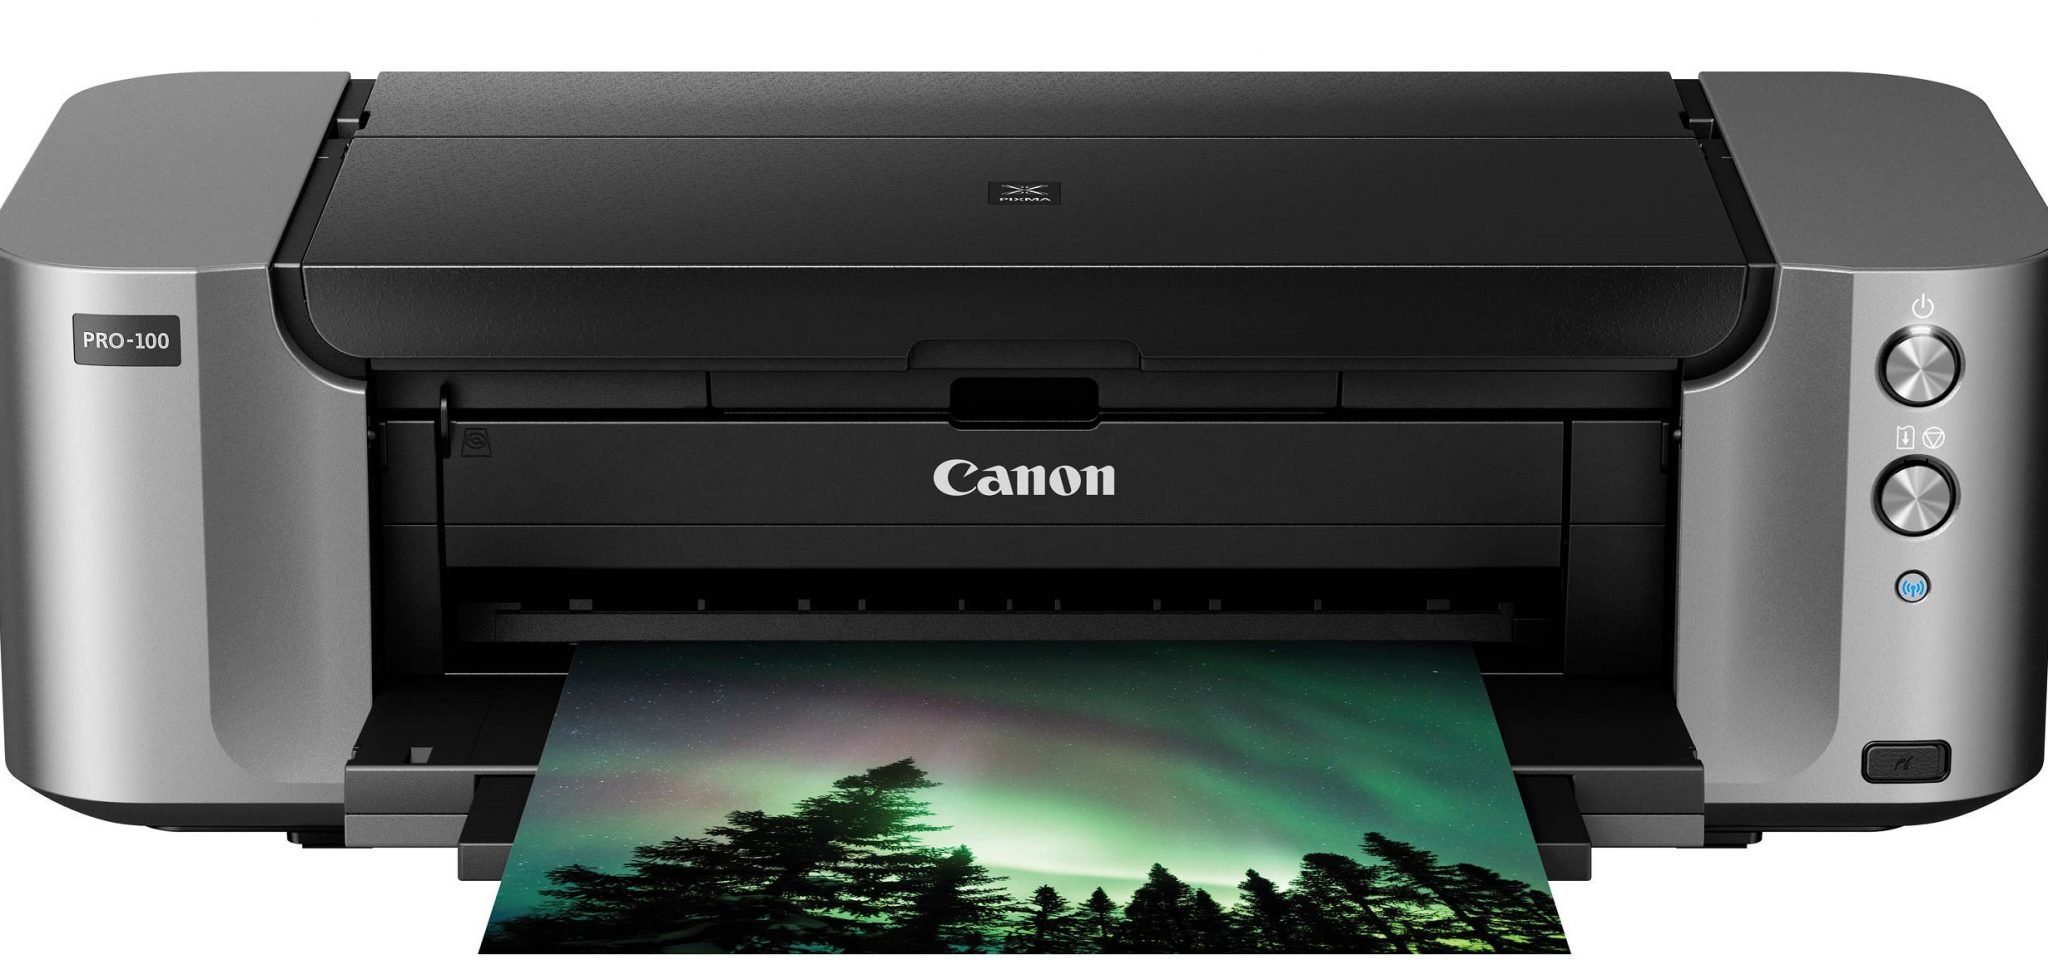 The 7 Best Home Office Printers 2020 - By Experts